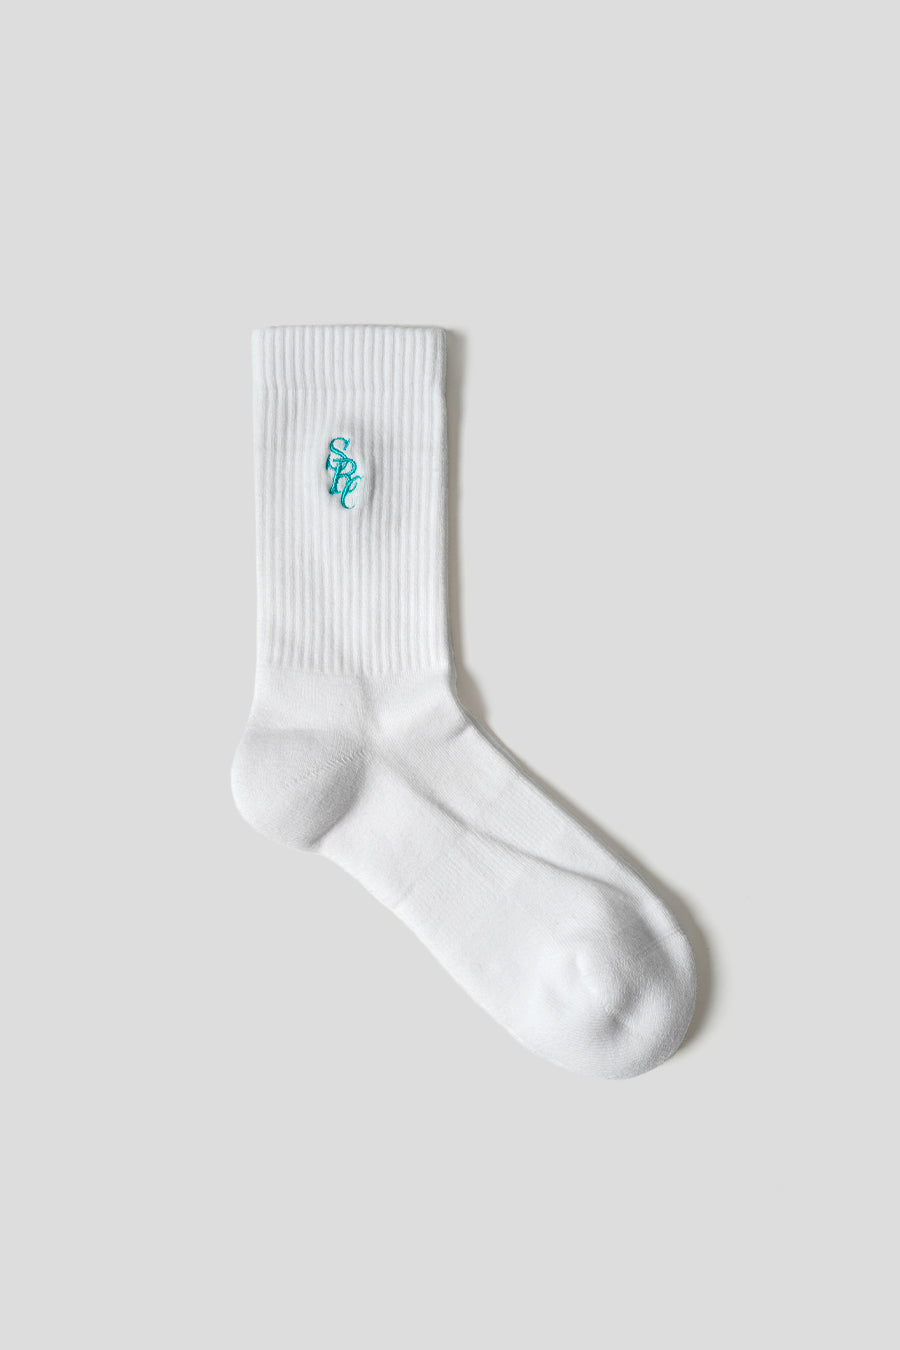 Sporty & Rich - CHAUSSETTES STELLA BLANCHES - LE LABO STORE